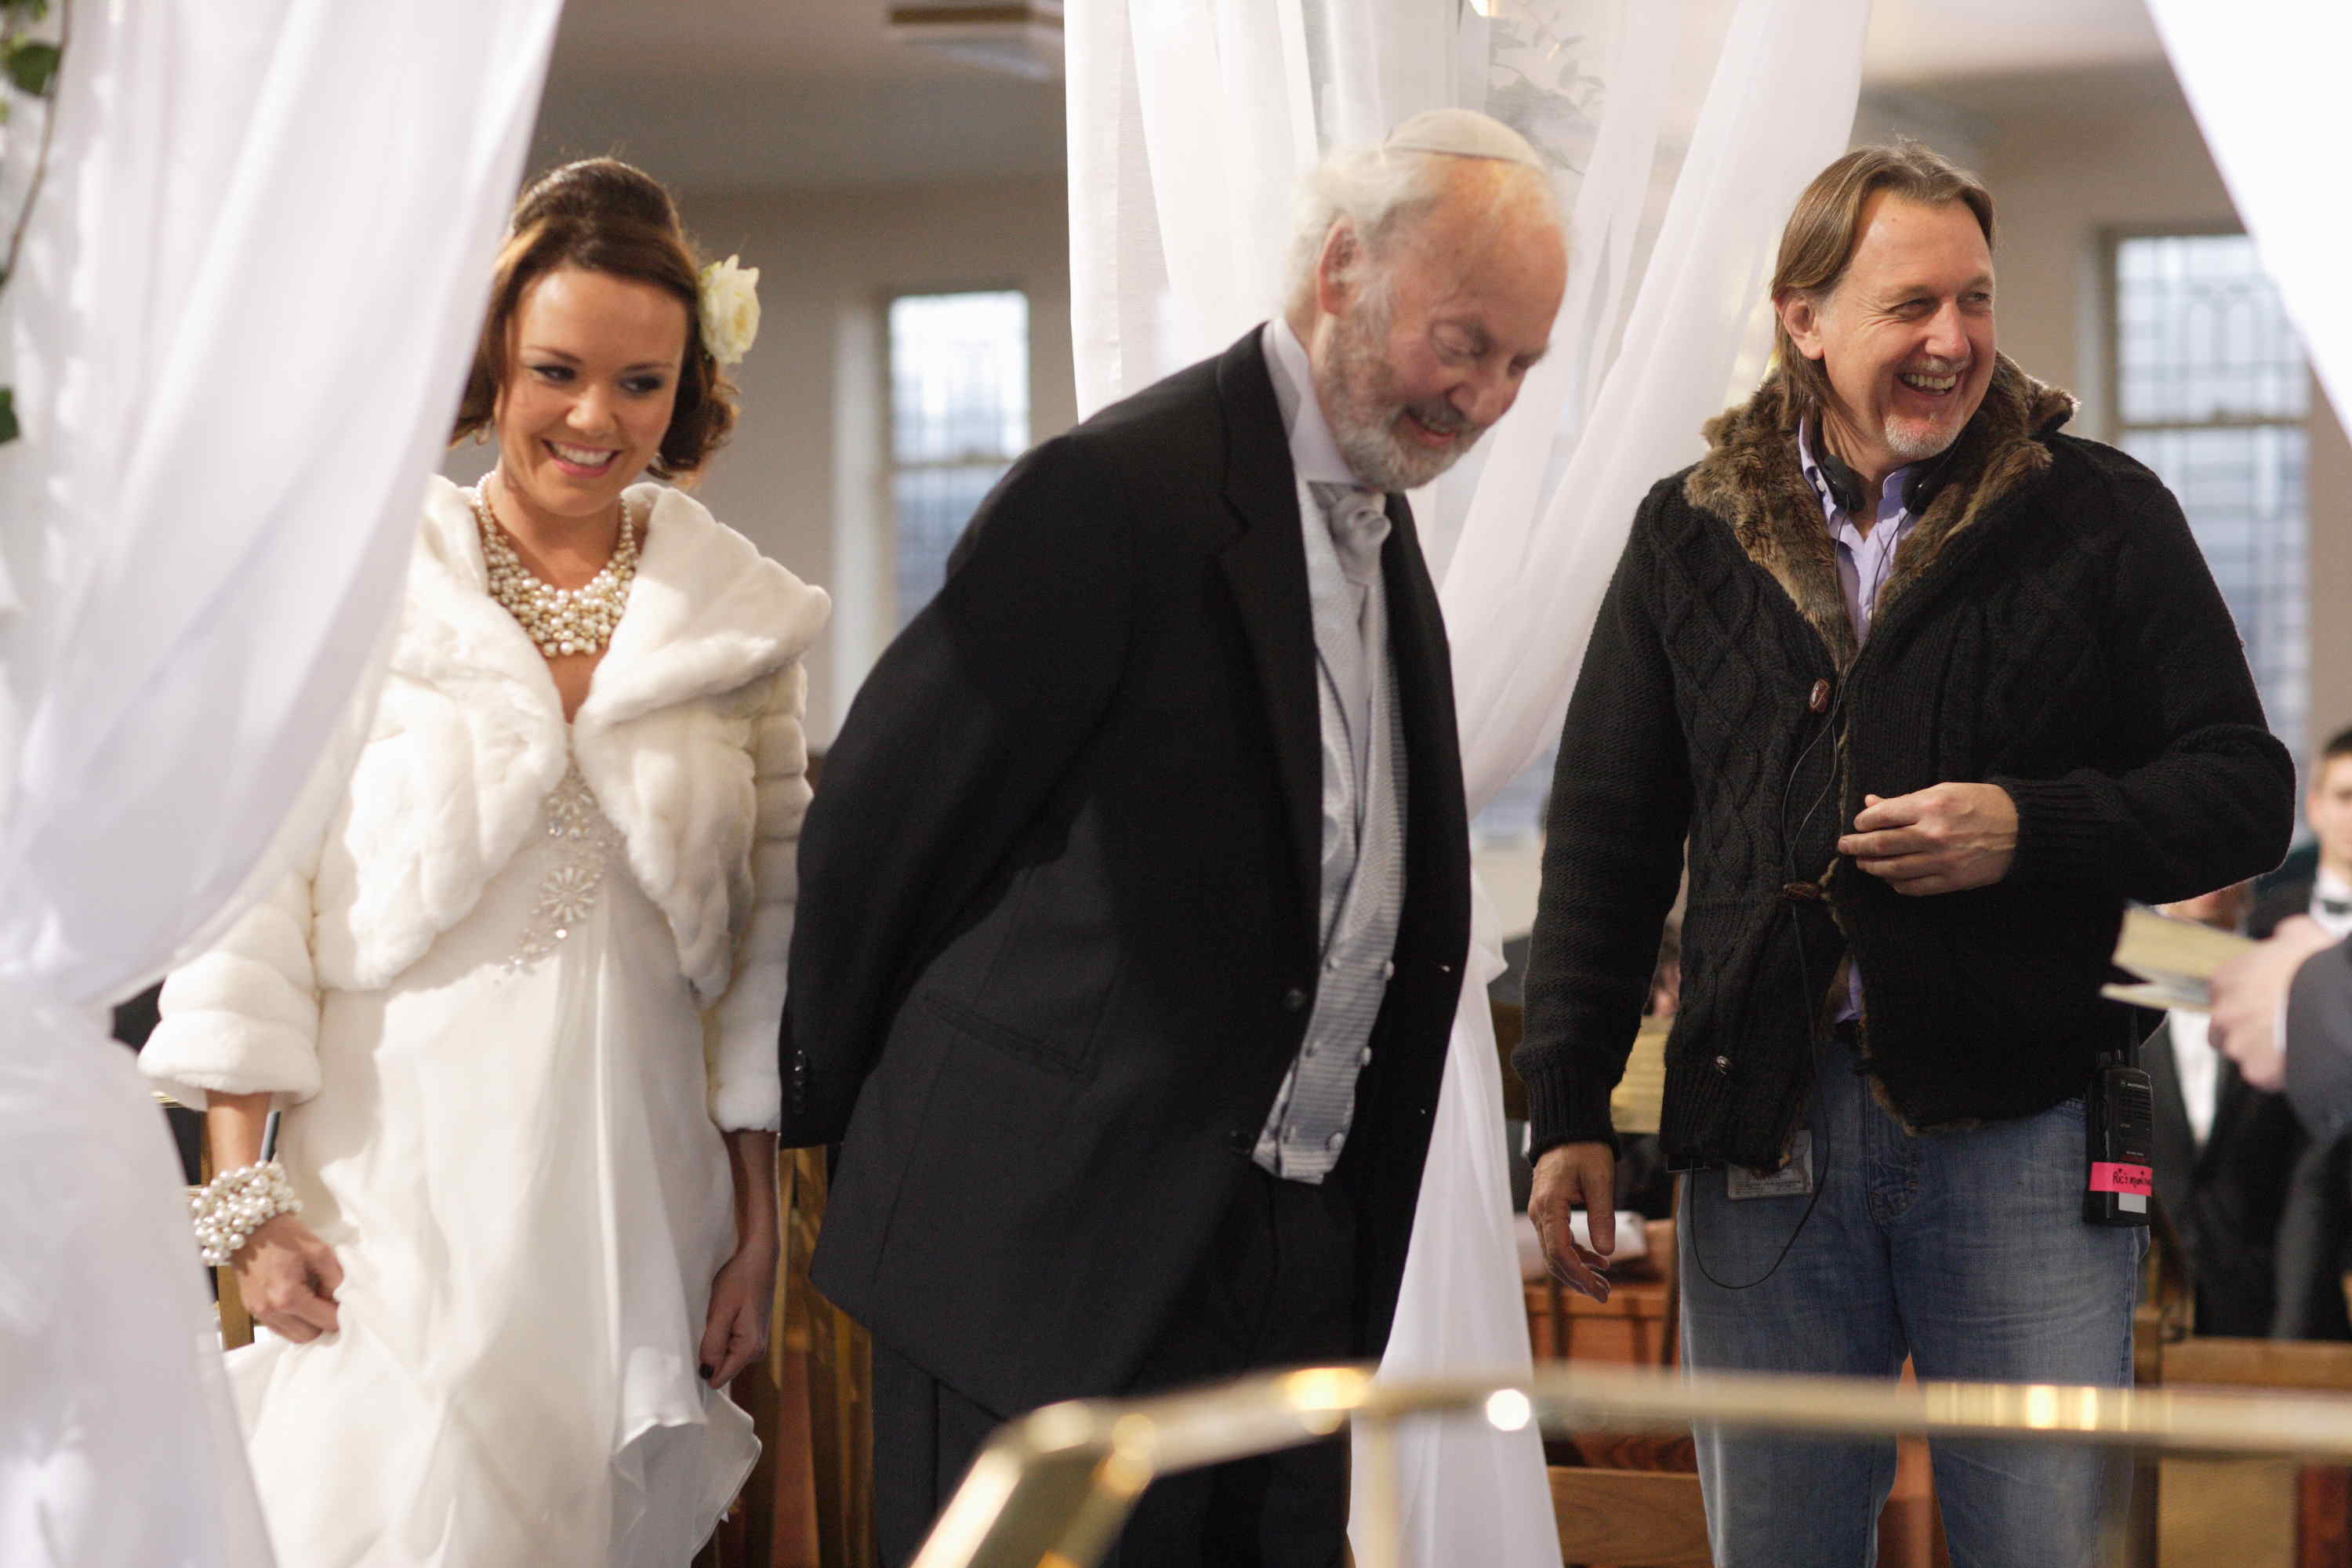 Rick on location for the BBC with Charlie Brooks and Harry Towb. (Eastenders 2008)